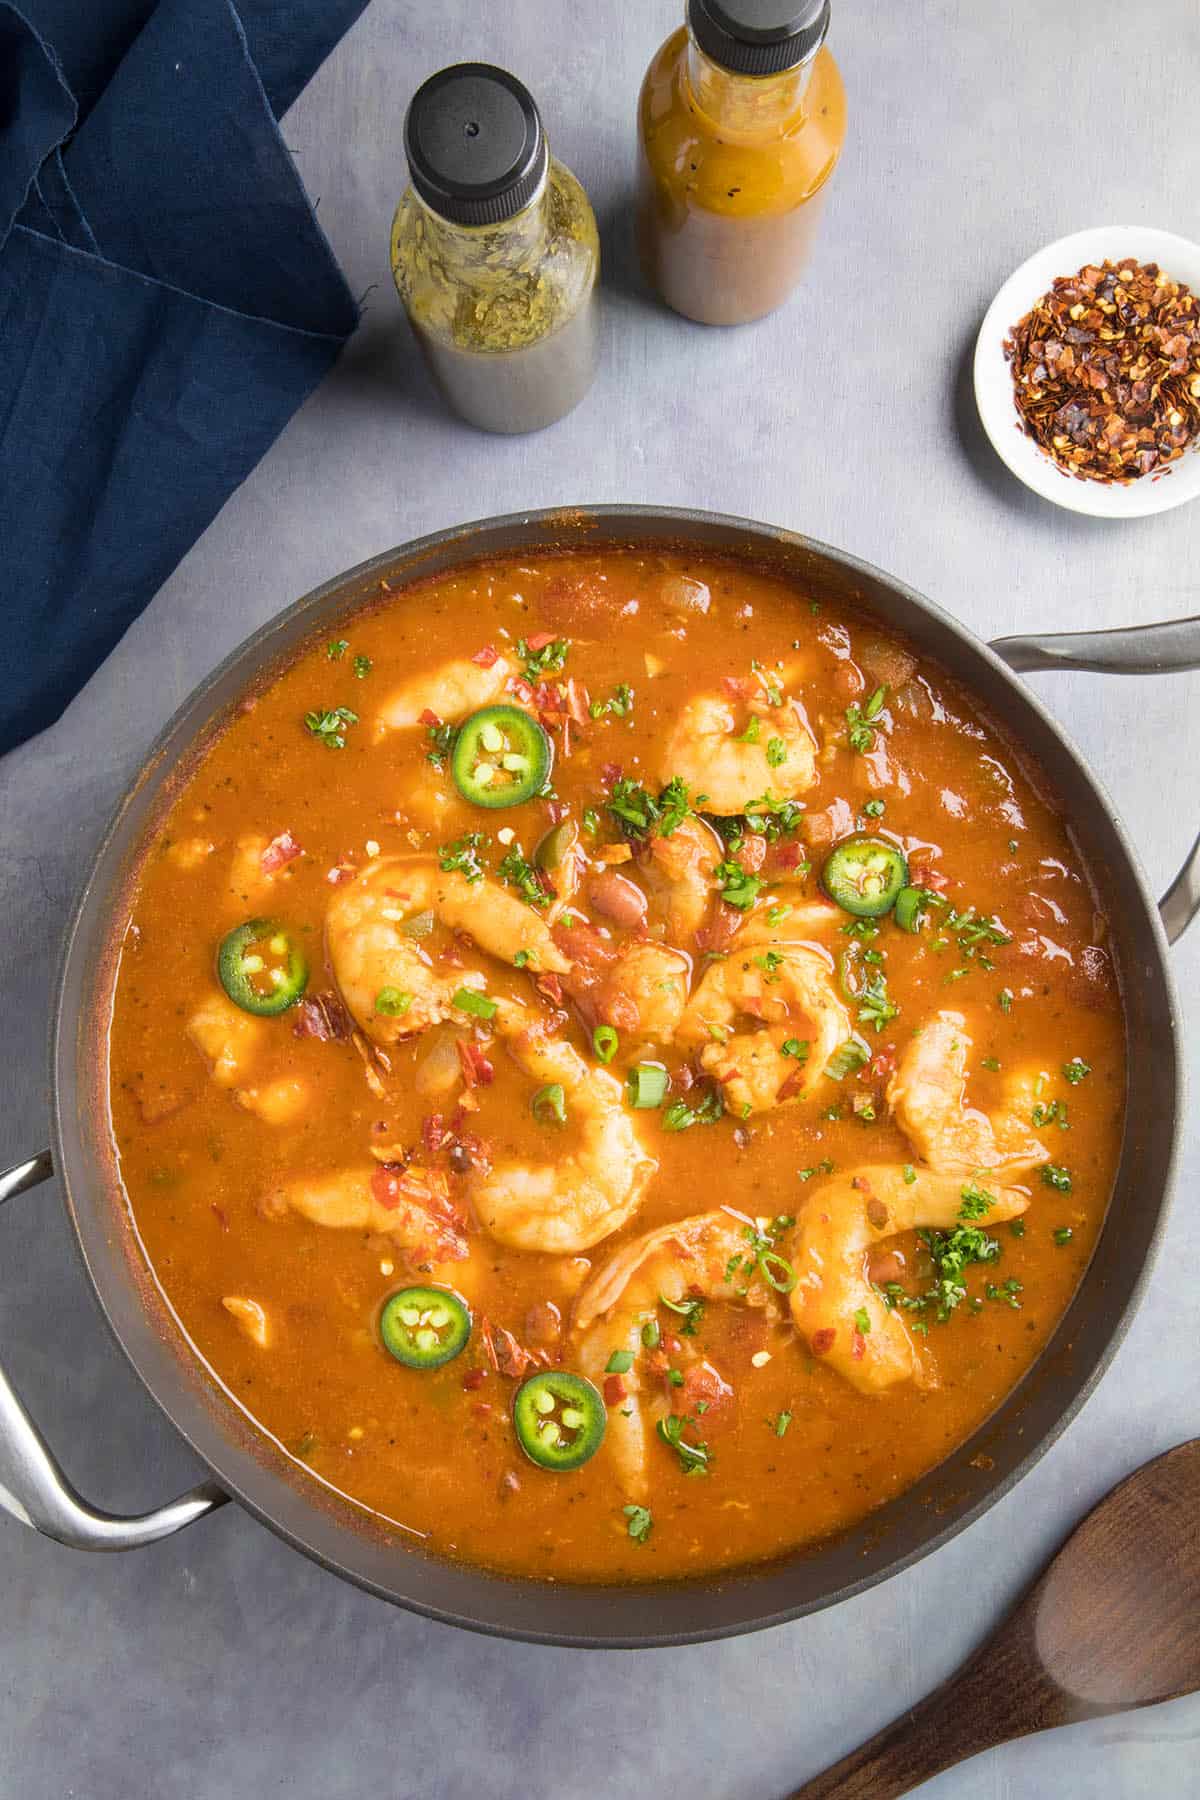 Shrimp and Red Bean Chili - In a pot, ready to serve